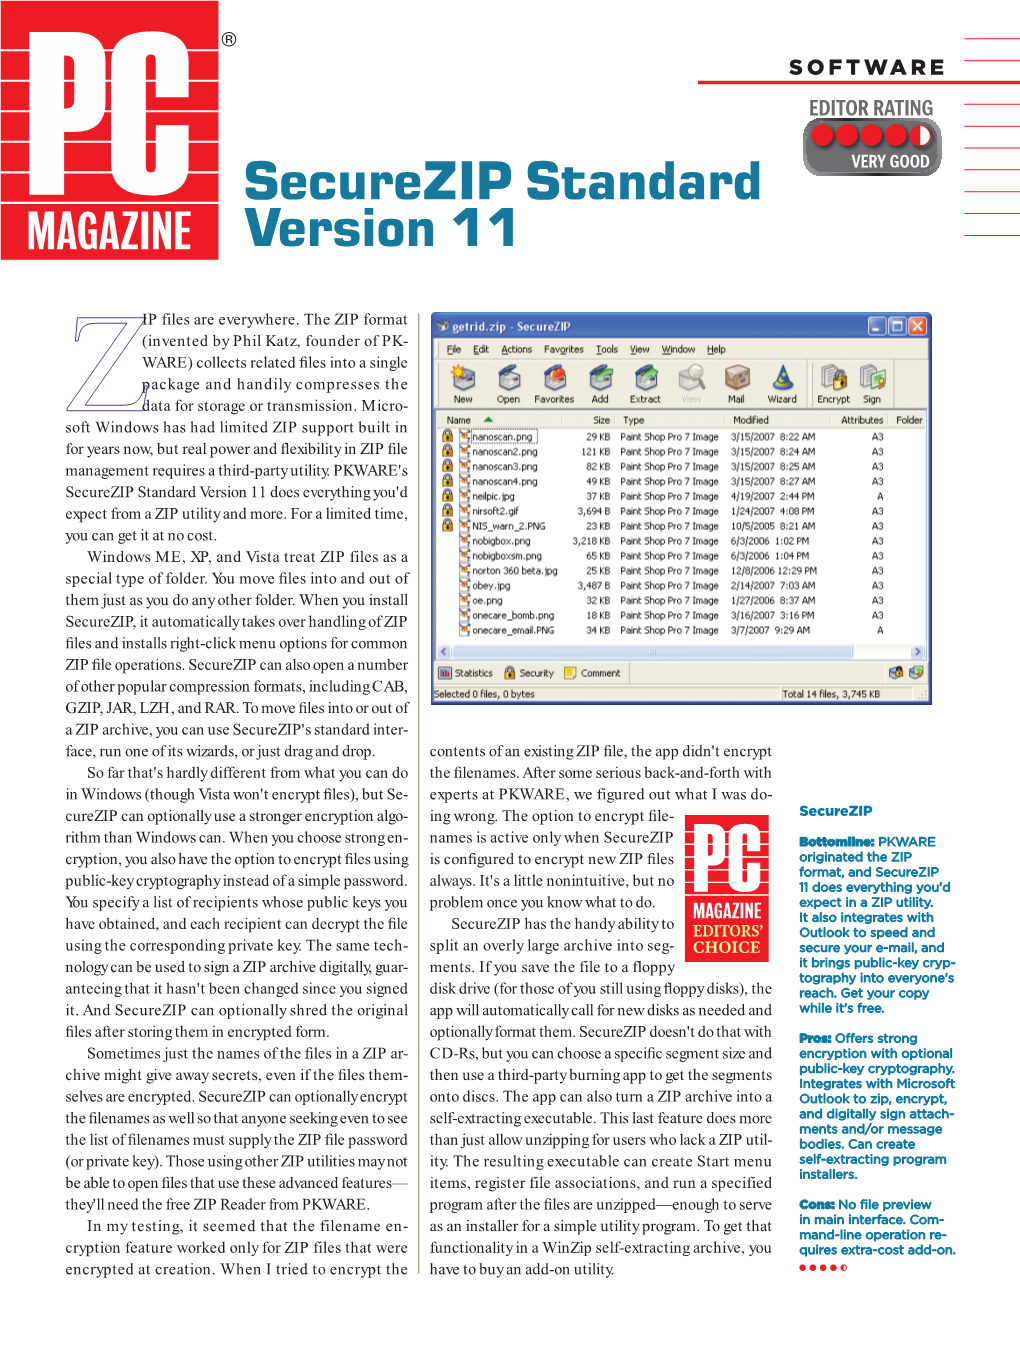 Securezip Standard Version 11 Does Everything You'd Expect from a ZIP Utility and More